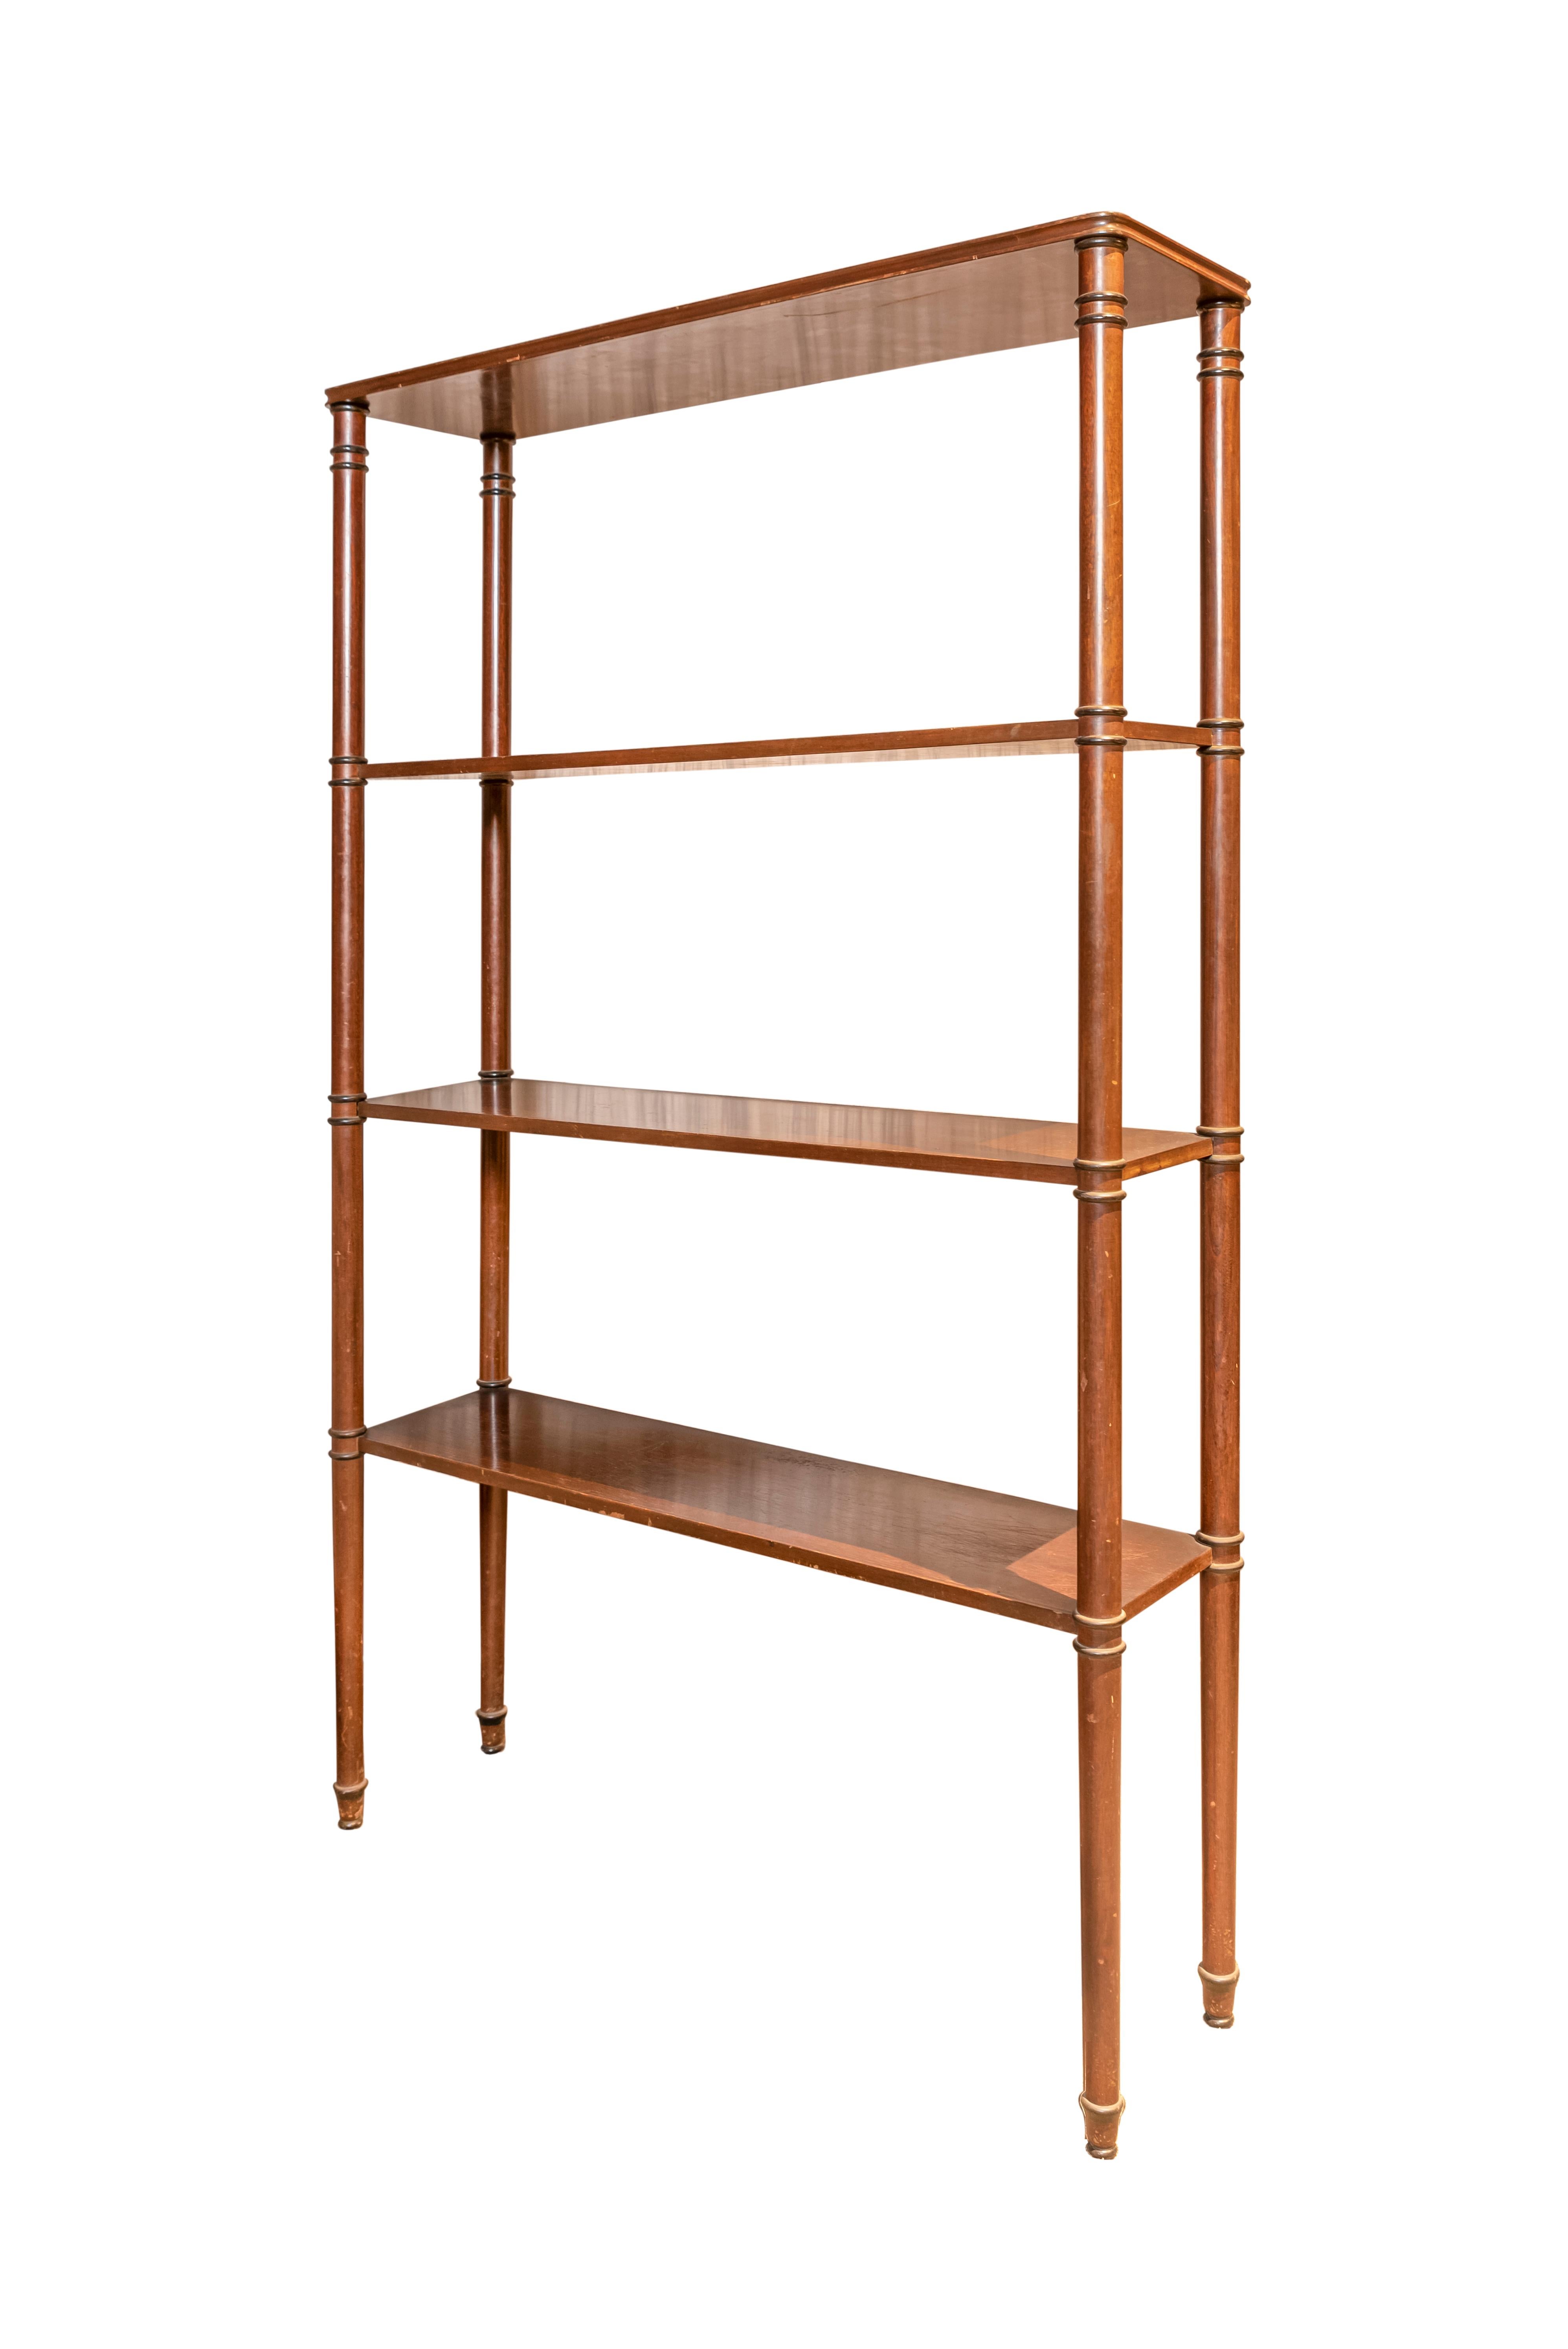 Pair of French wood four shelves open bookcase or four-tier étagère. In four column support detailed with black painted rings.
In the manner of Maison Jansen.